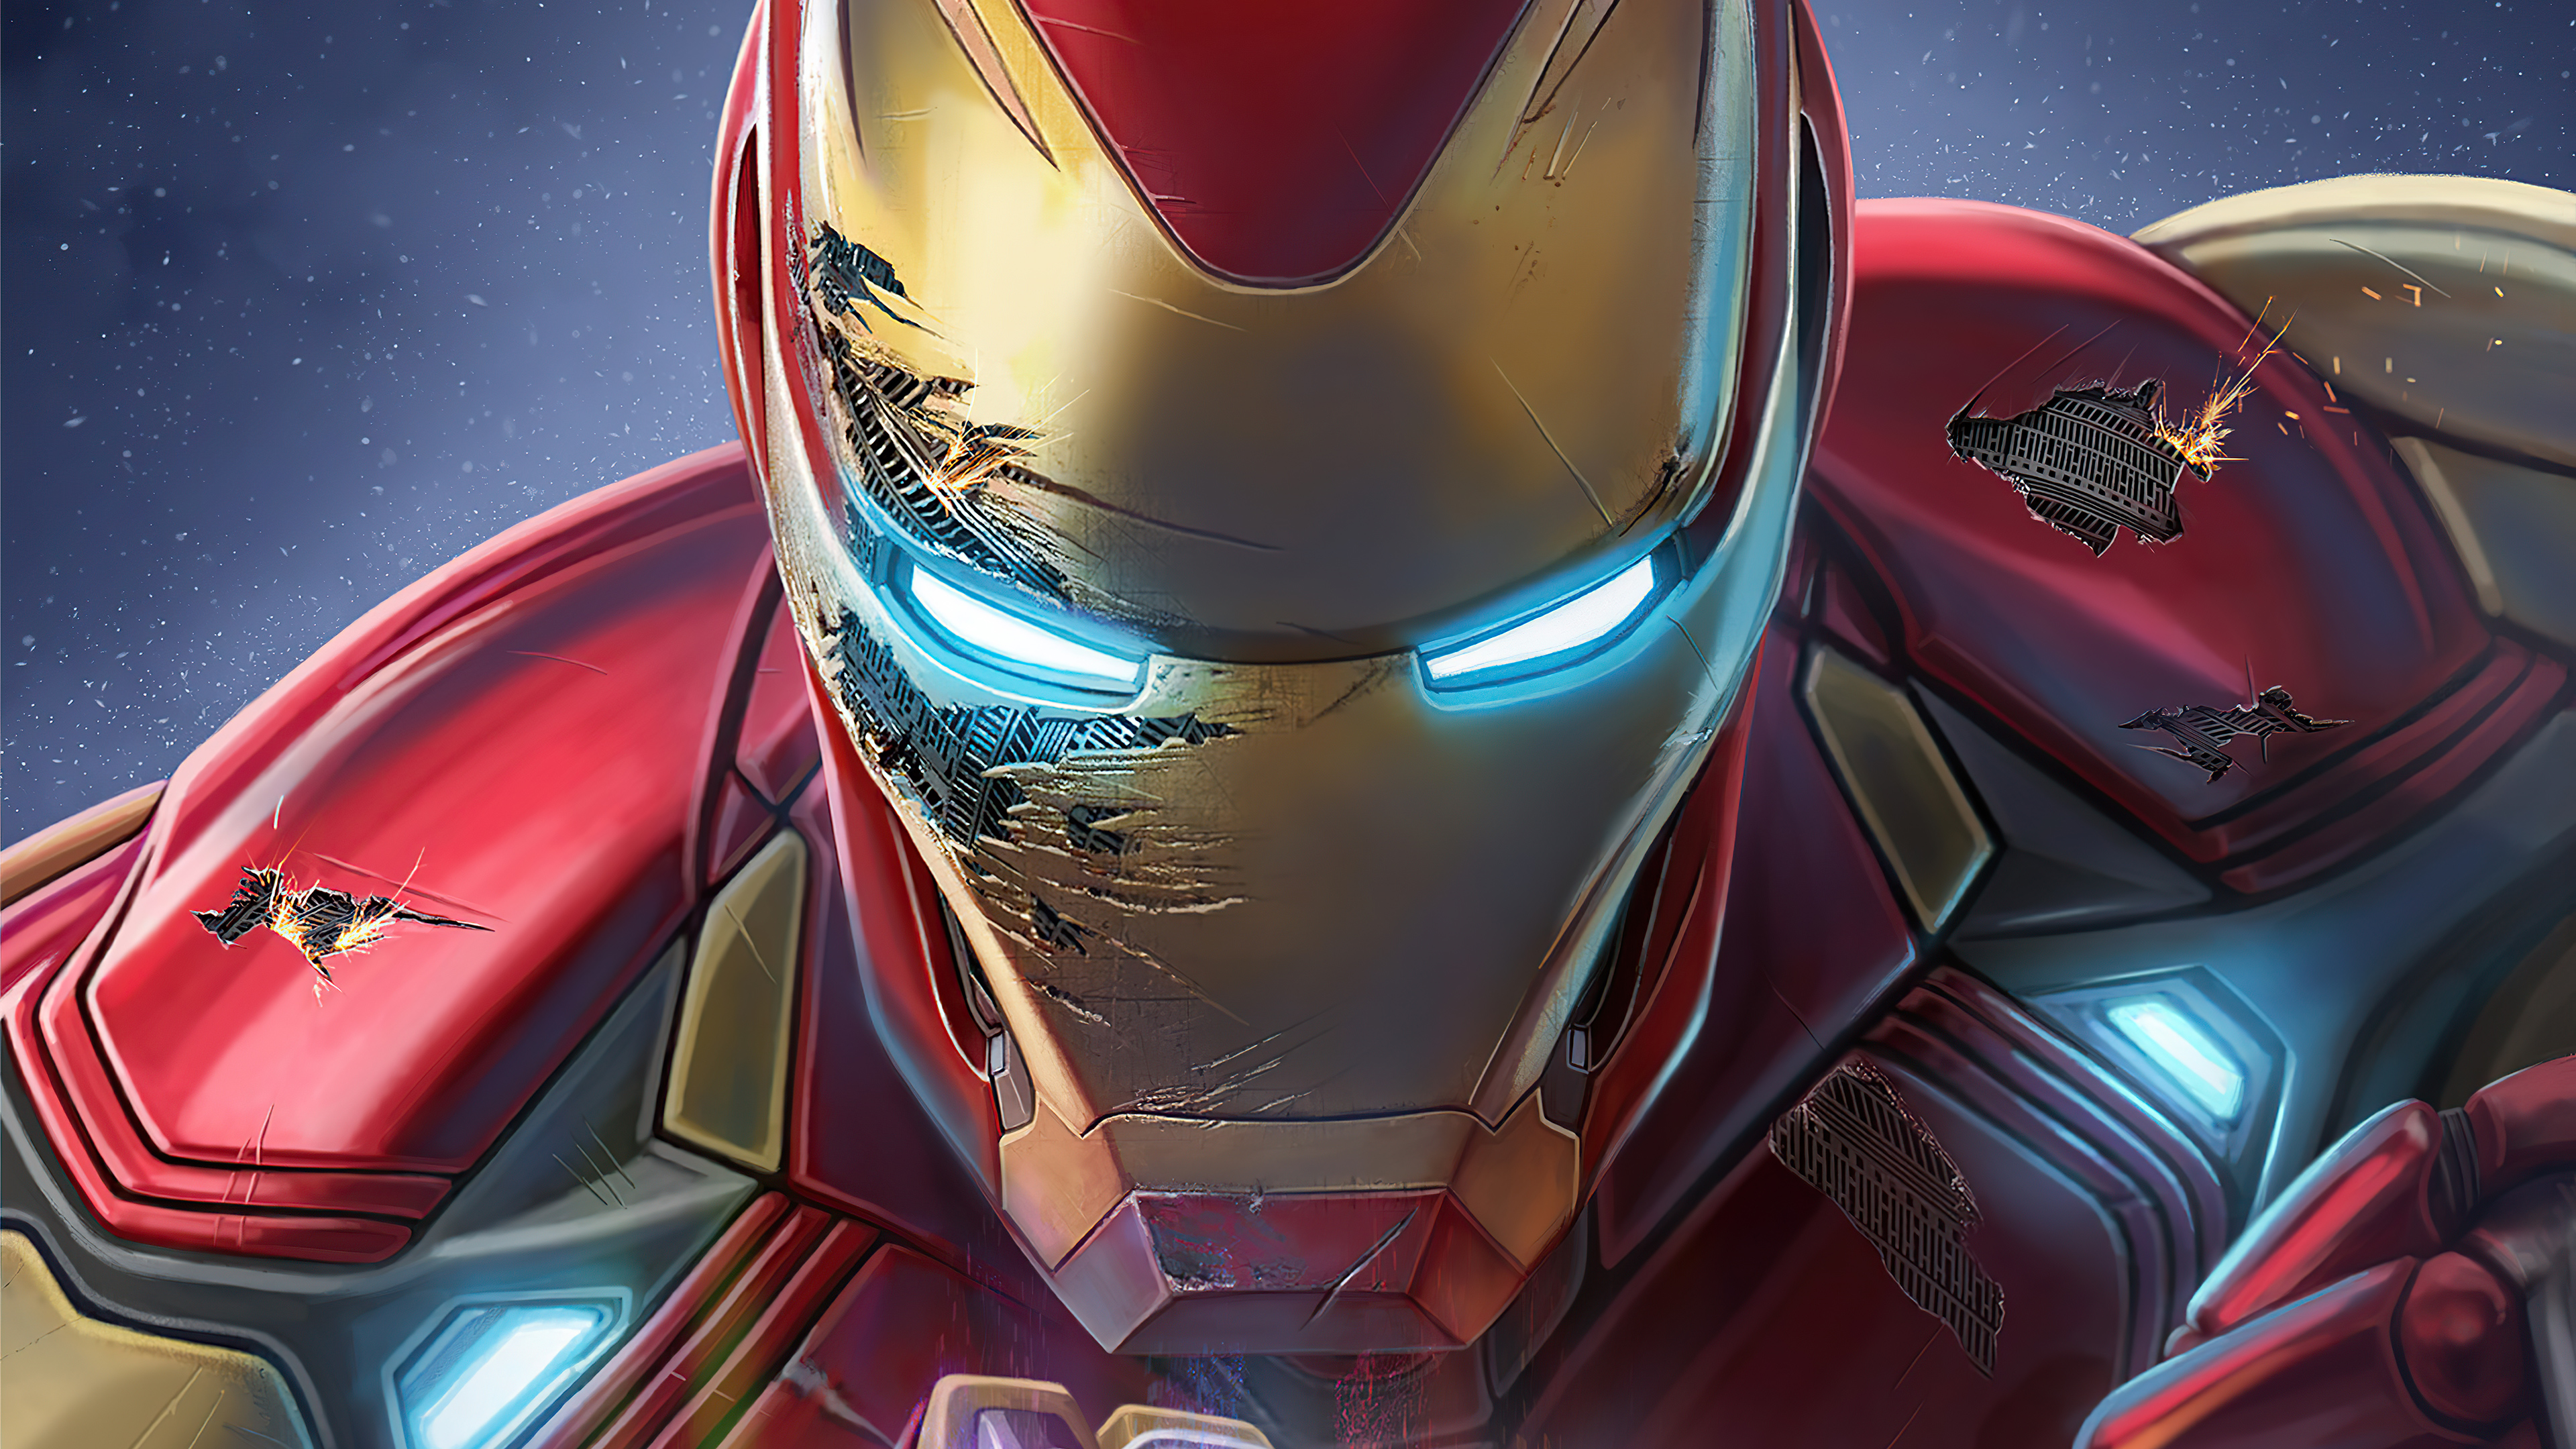 Iron man the avengers hd superheroes k wallpapers images backgrounds photos and pictures